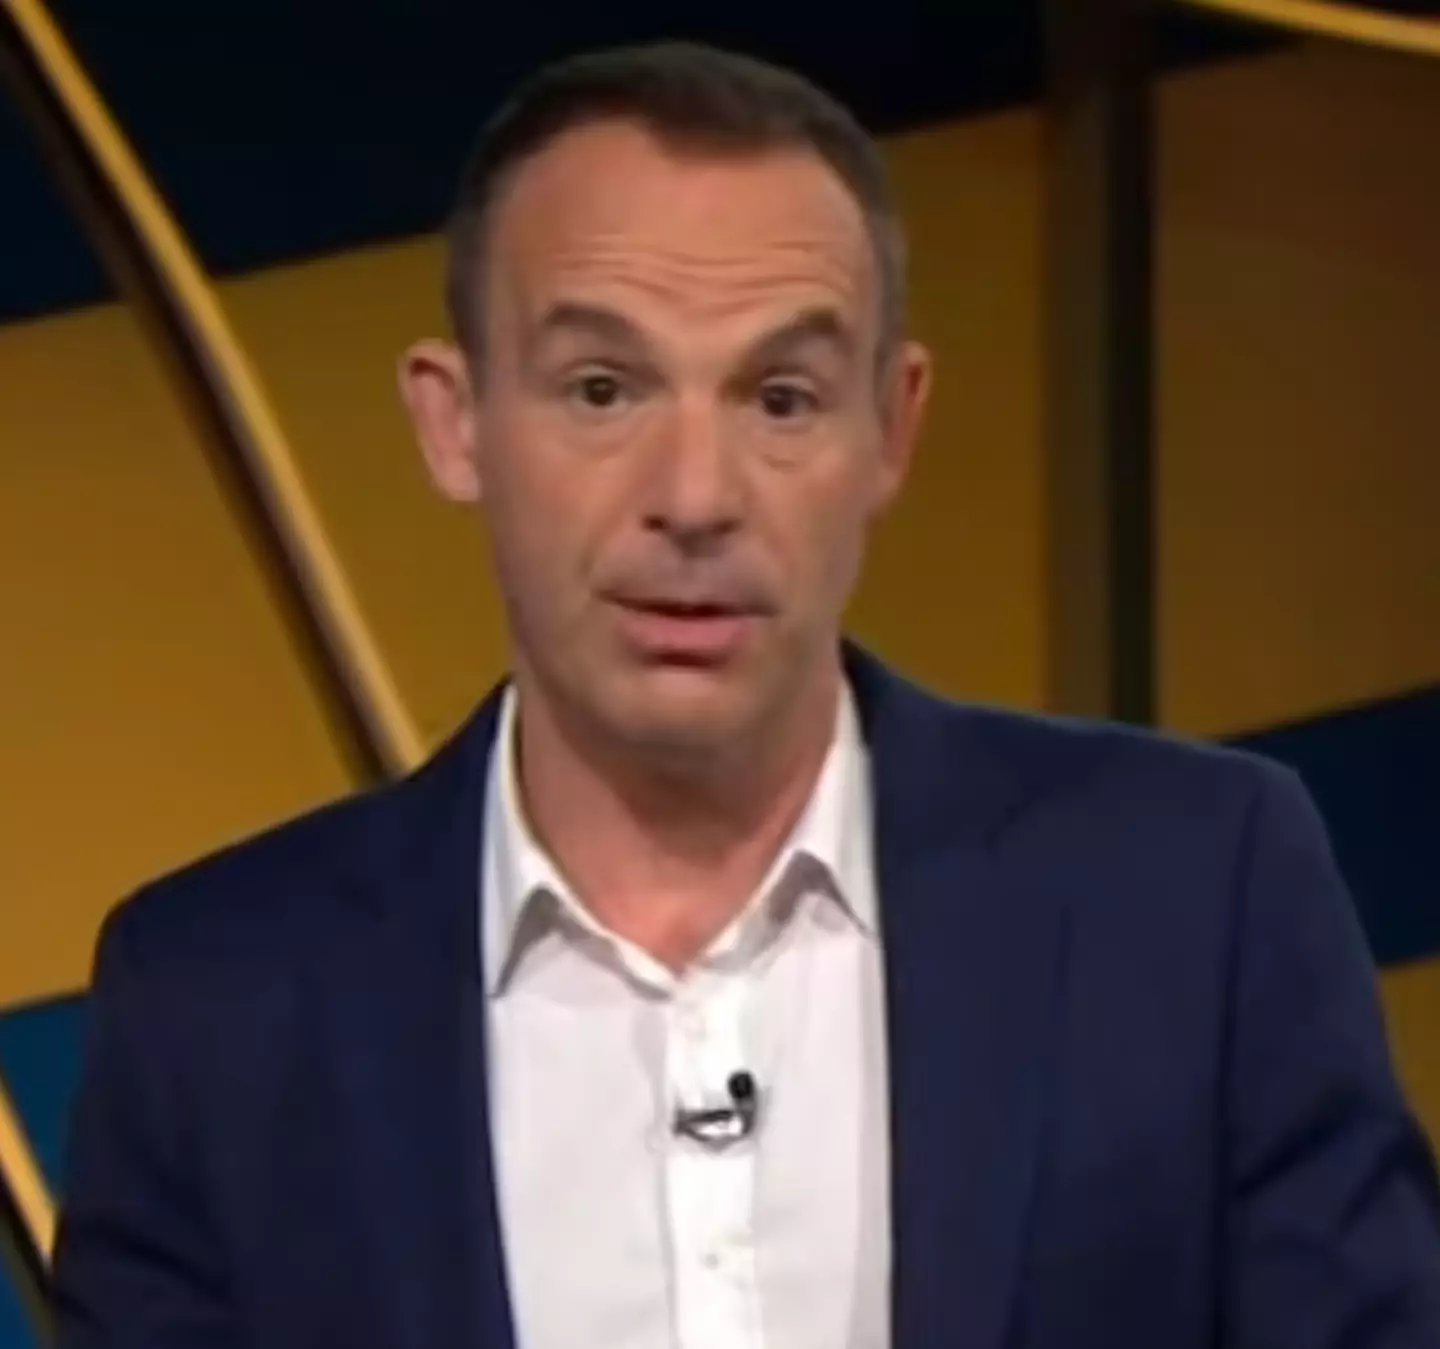 Martin Lewis agrees on cheaper ways to cook instead of an oven.